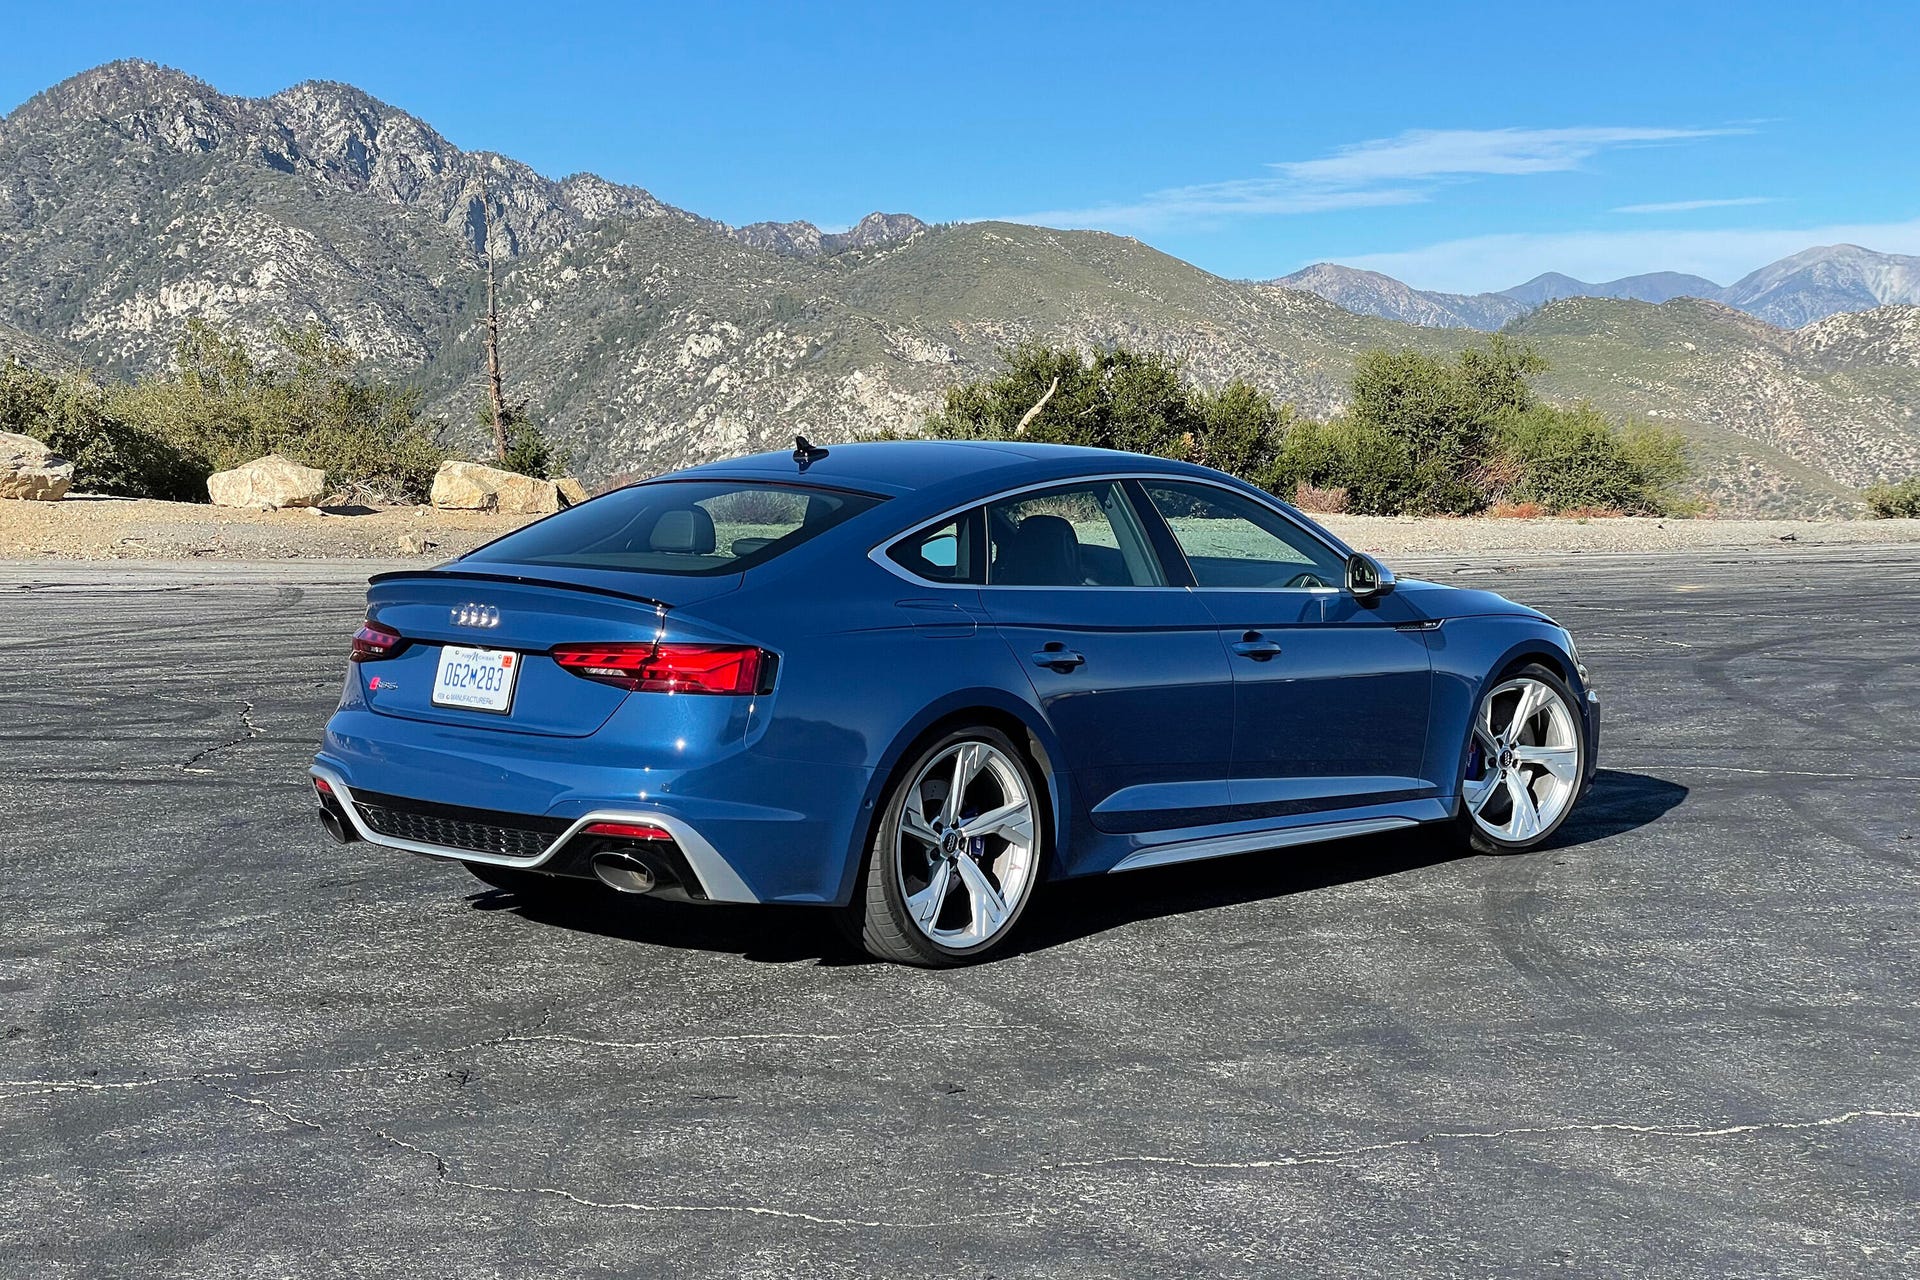 2021 Audi RS5 Sportback review: Where's the drama? - CNET